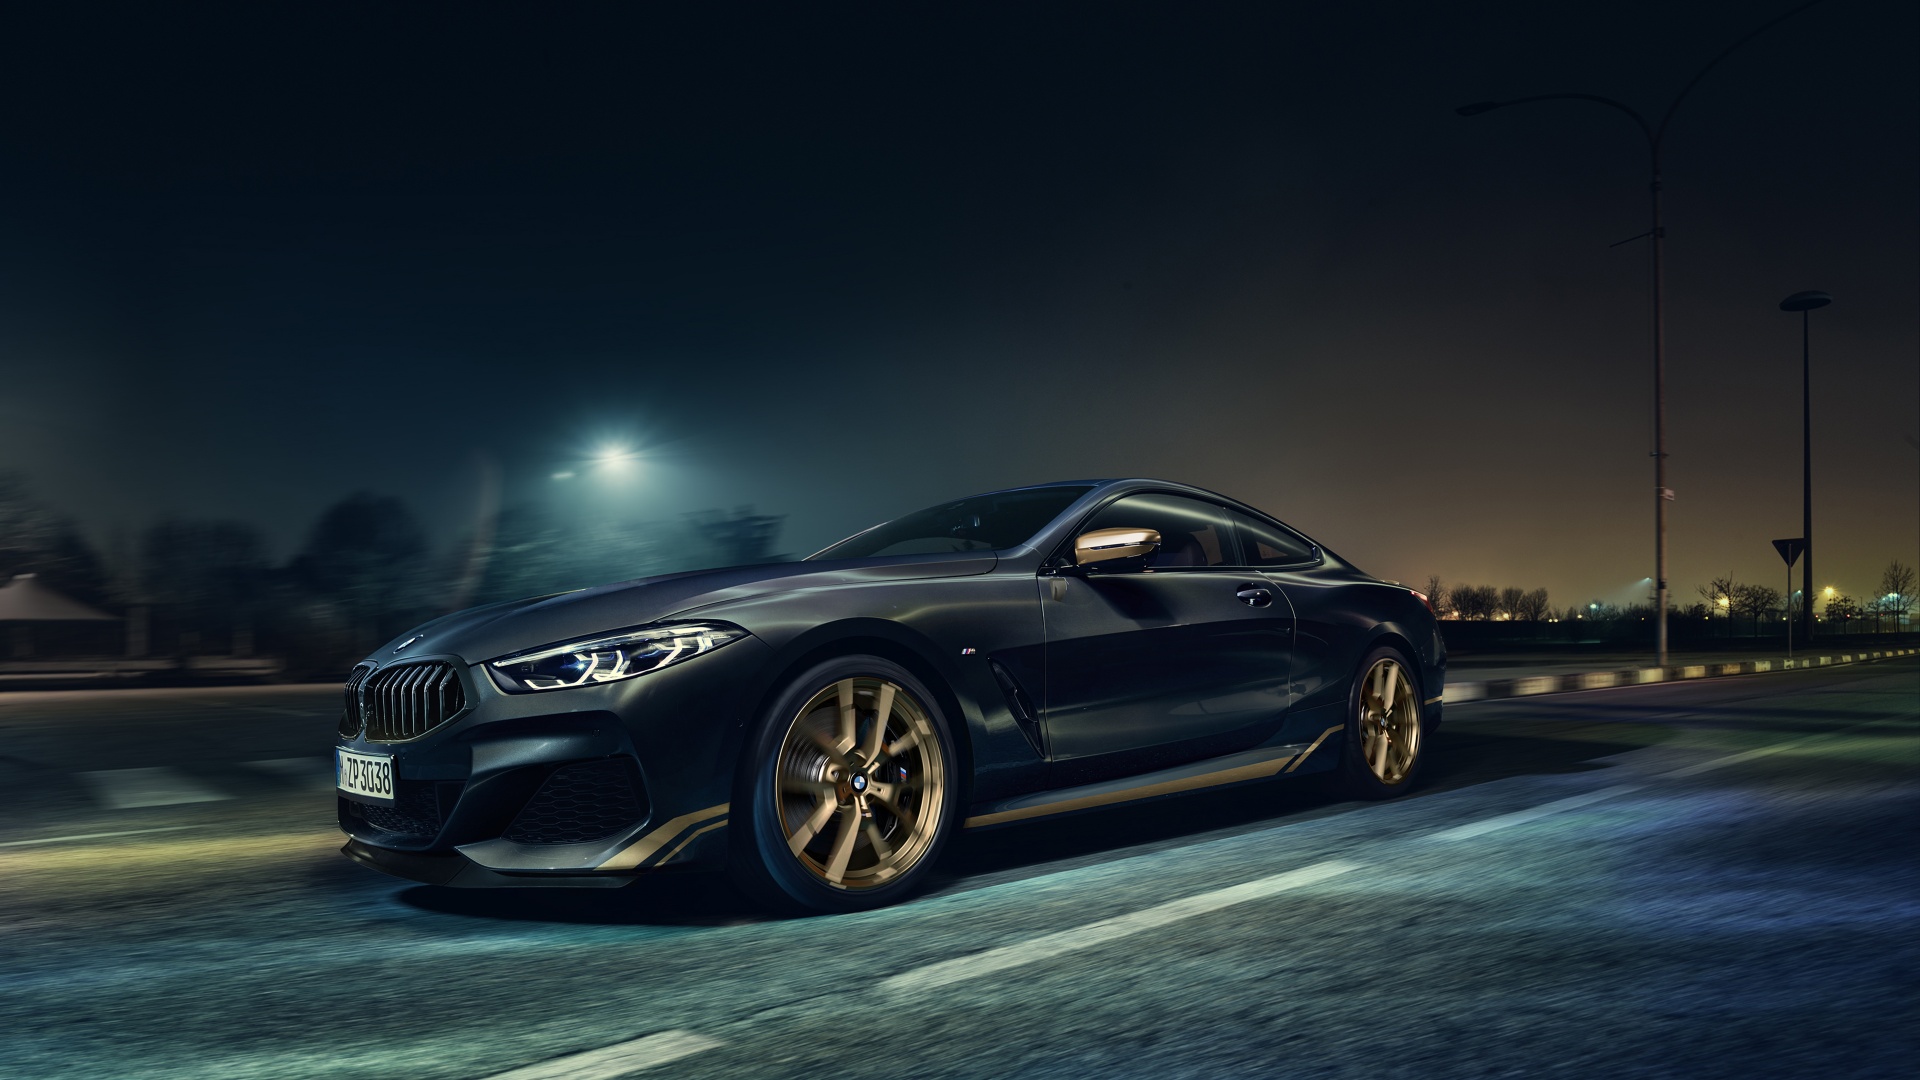 Bmw M850i Xdrive Coupe Edition Wallpaper 4k 2020 Cars 1418